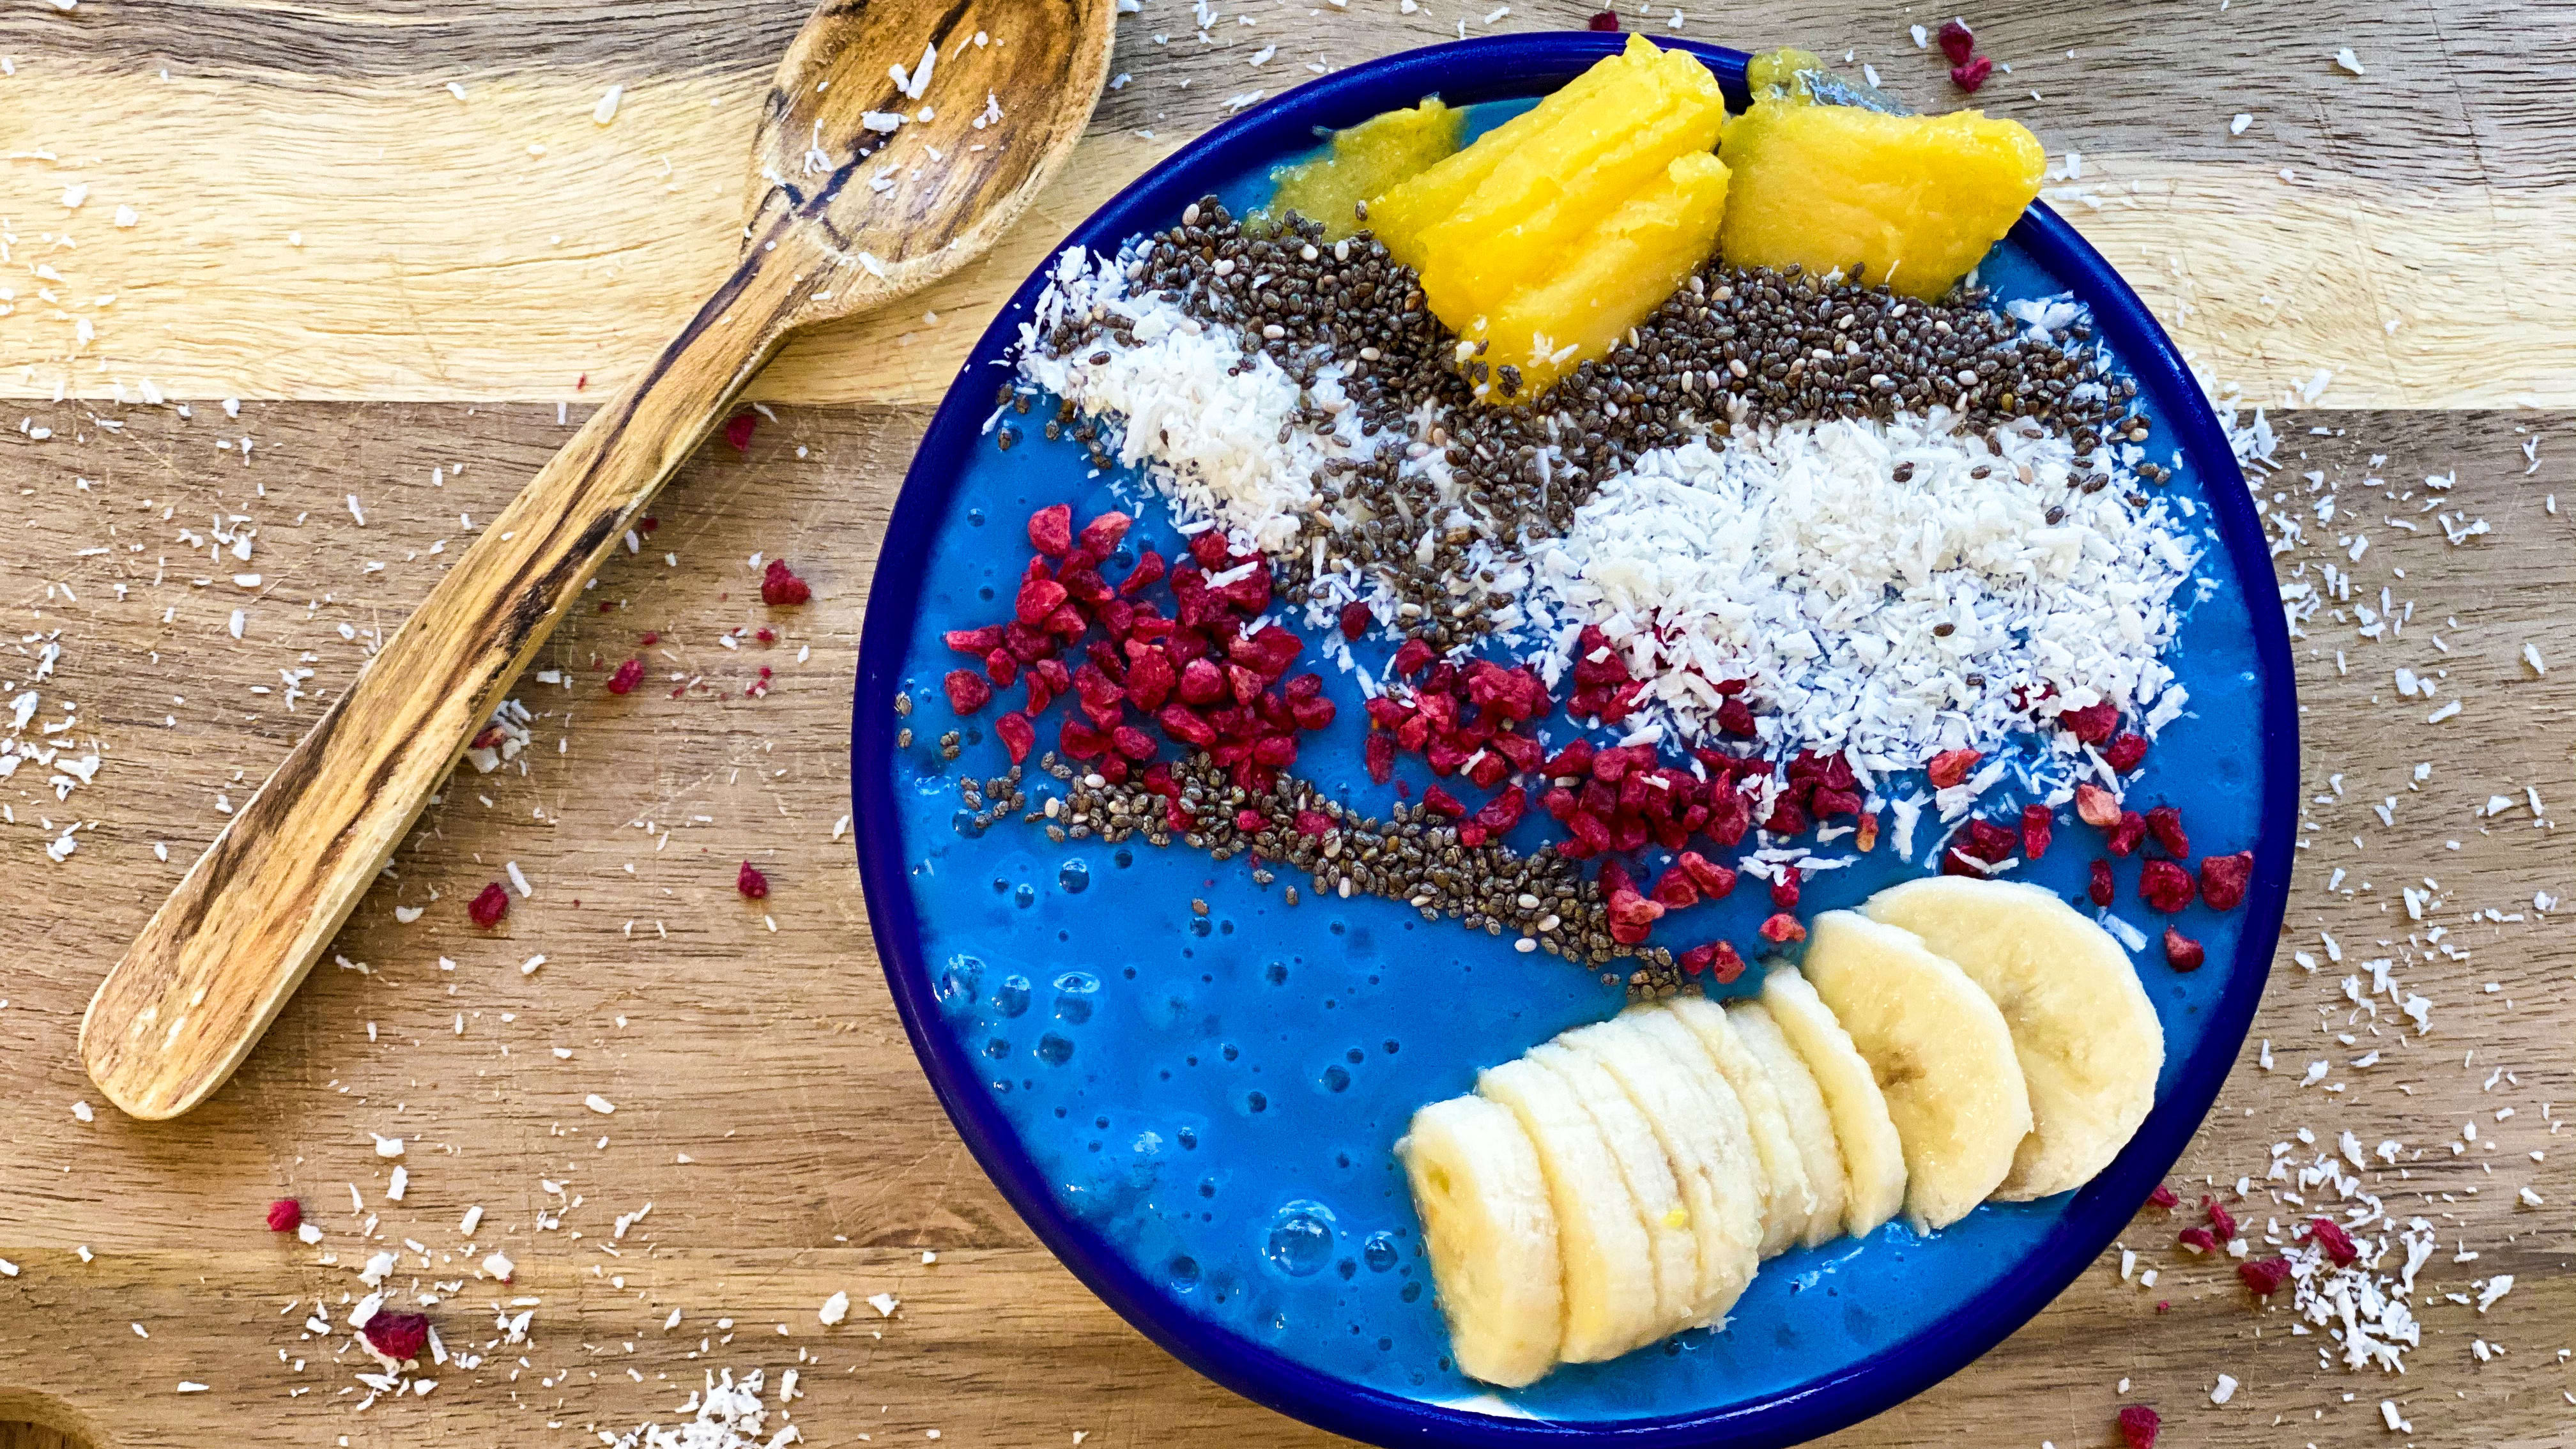 Ninja Kitchen on Instagram: The perfect smoothie bowl, made at